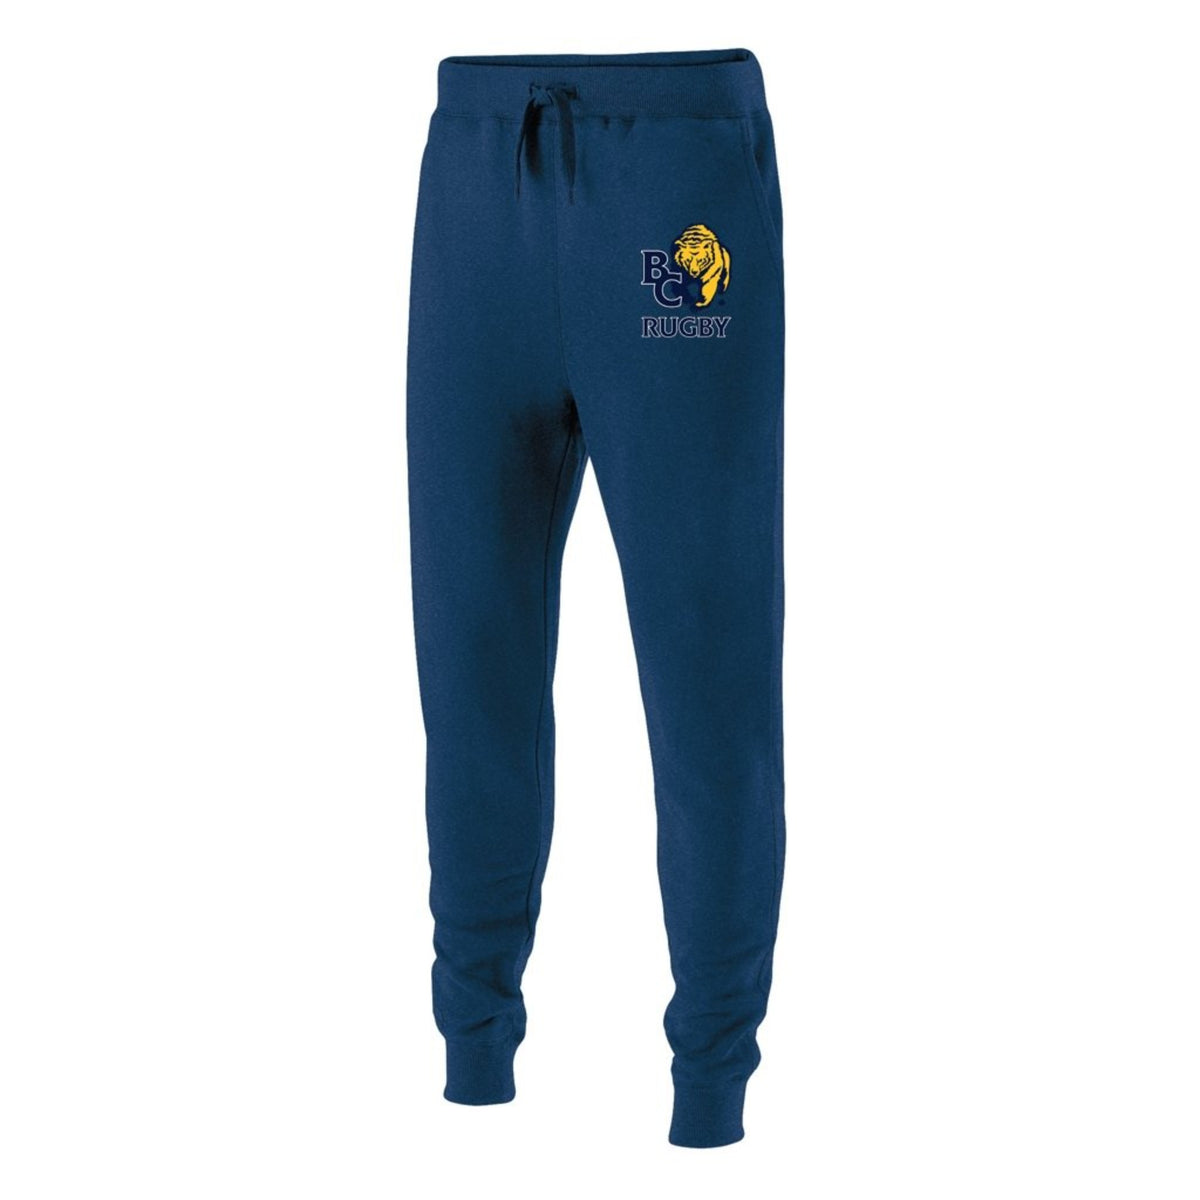 BC Rugby 2021 &quot;Team&quot; Sweat Pants - Youth Dark Navy - www.therugbyshop.com www.therugbyshop.com YOUTH / NAVY / S XIX Brands PANTS BC Rugby 2021 &quot;Team&quot; Sweat Pants - Youth Dark Navy